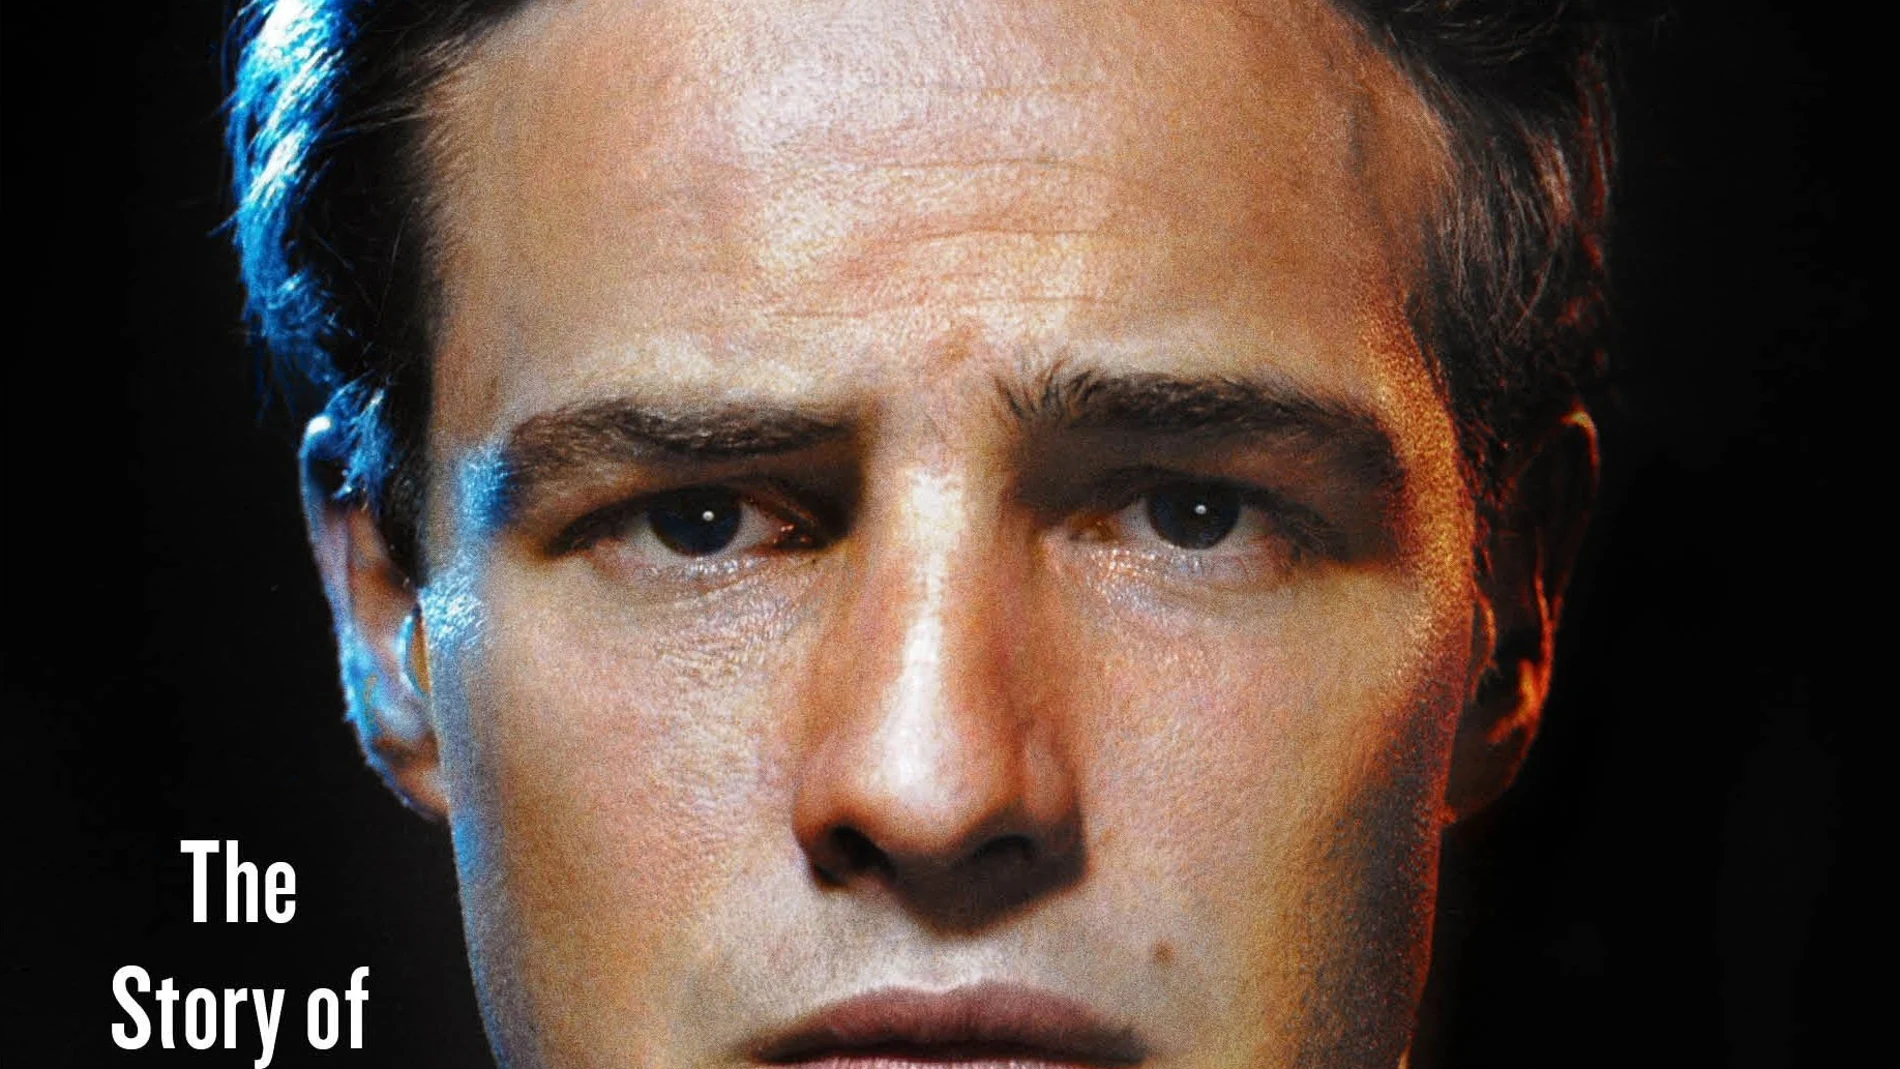 This cover image released by Harper shows "The Contender: The Story of Marlon Brando," by William J. Mann. (Harper via AP)